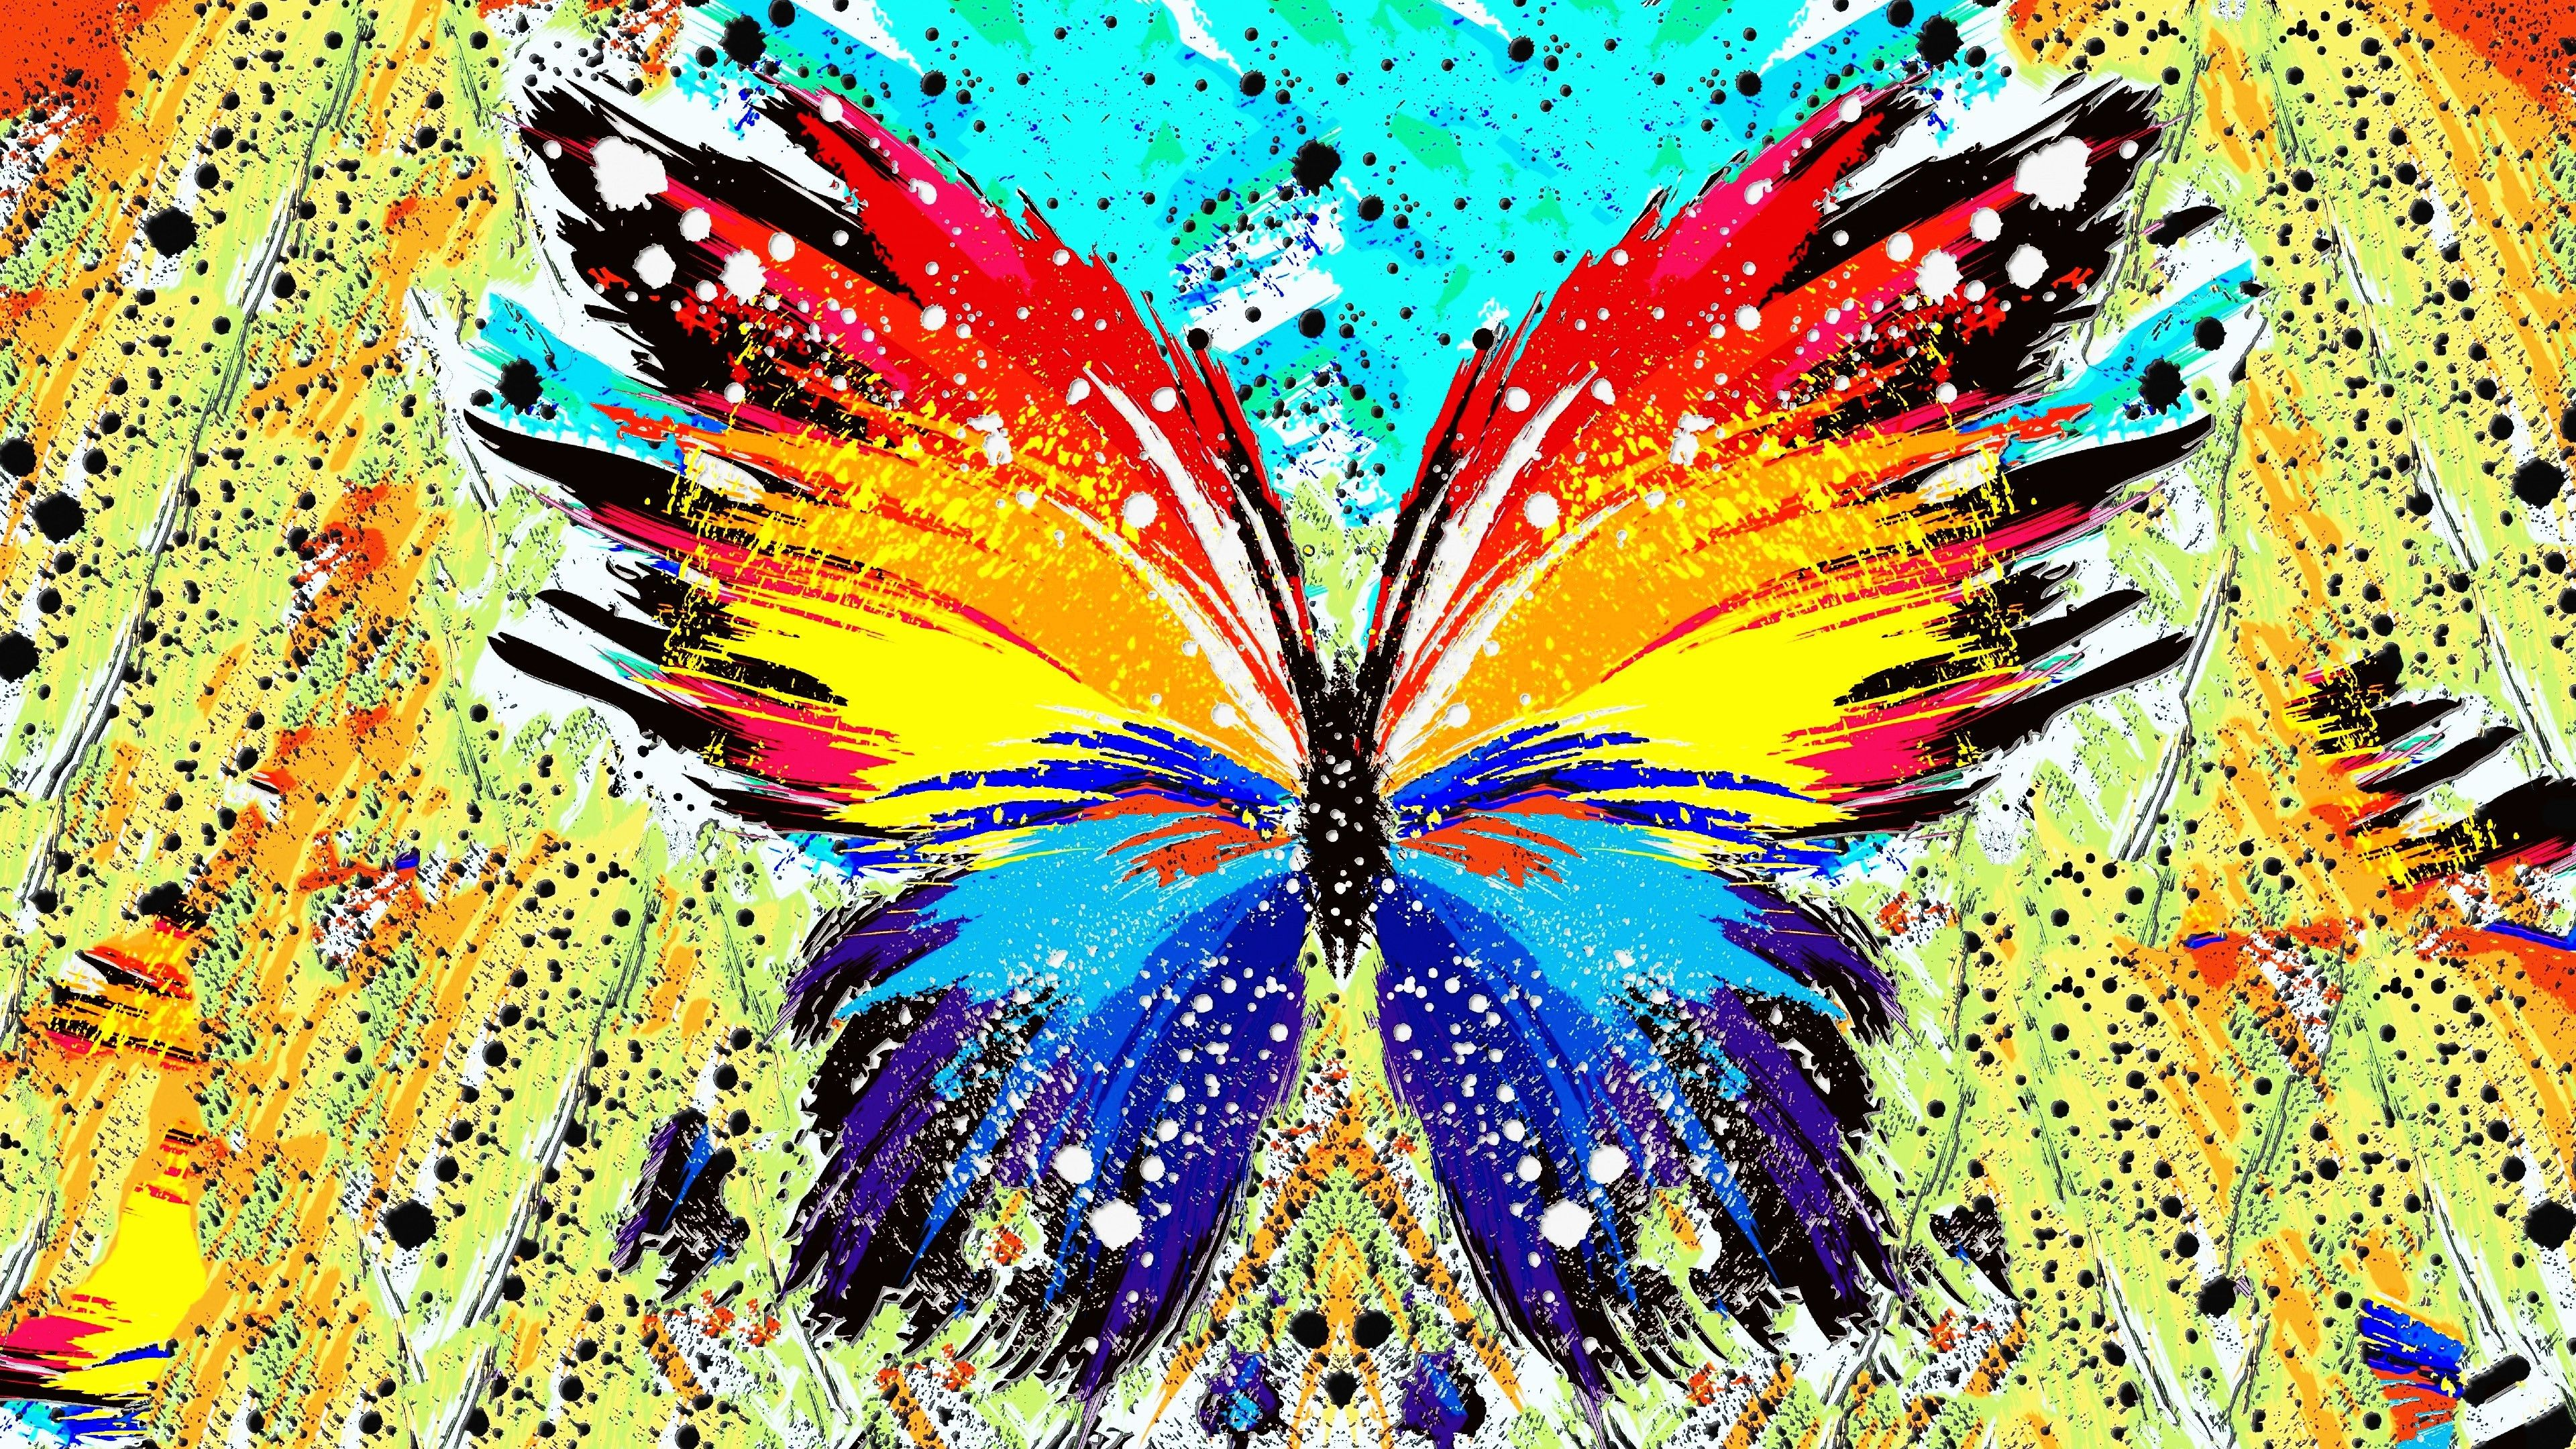 3840x2160 abstract, Paint Splatter, Butterfly Wallpapers HD / Desktop and Mobile Backgrounds | Posters art prints, Butterfly wallpaper, Painting